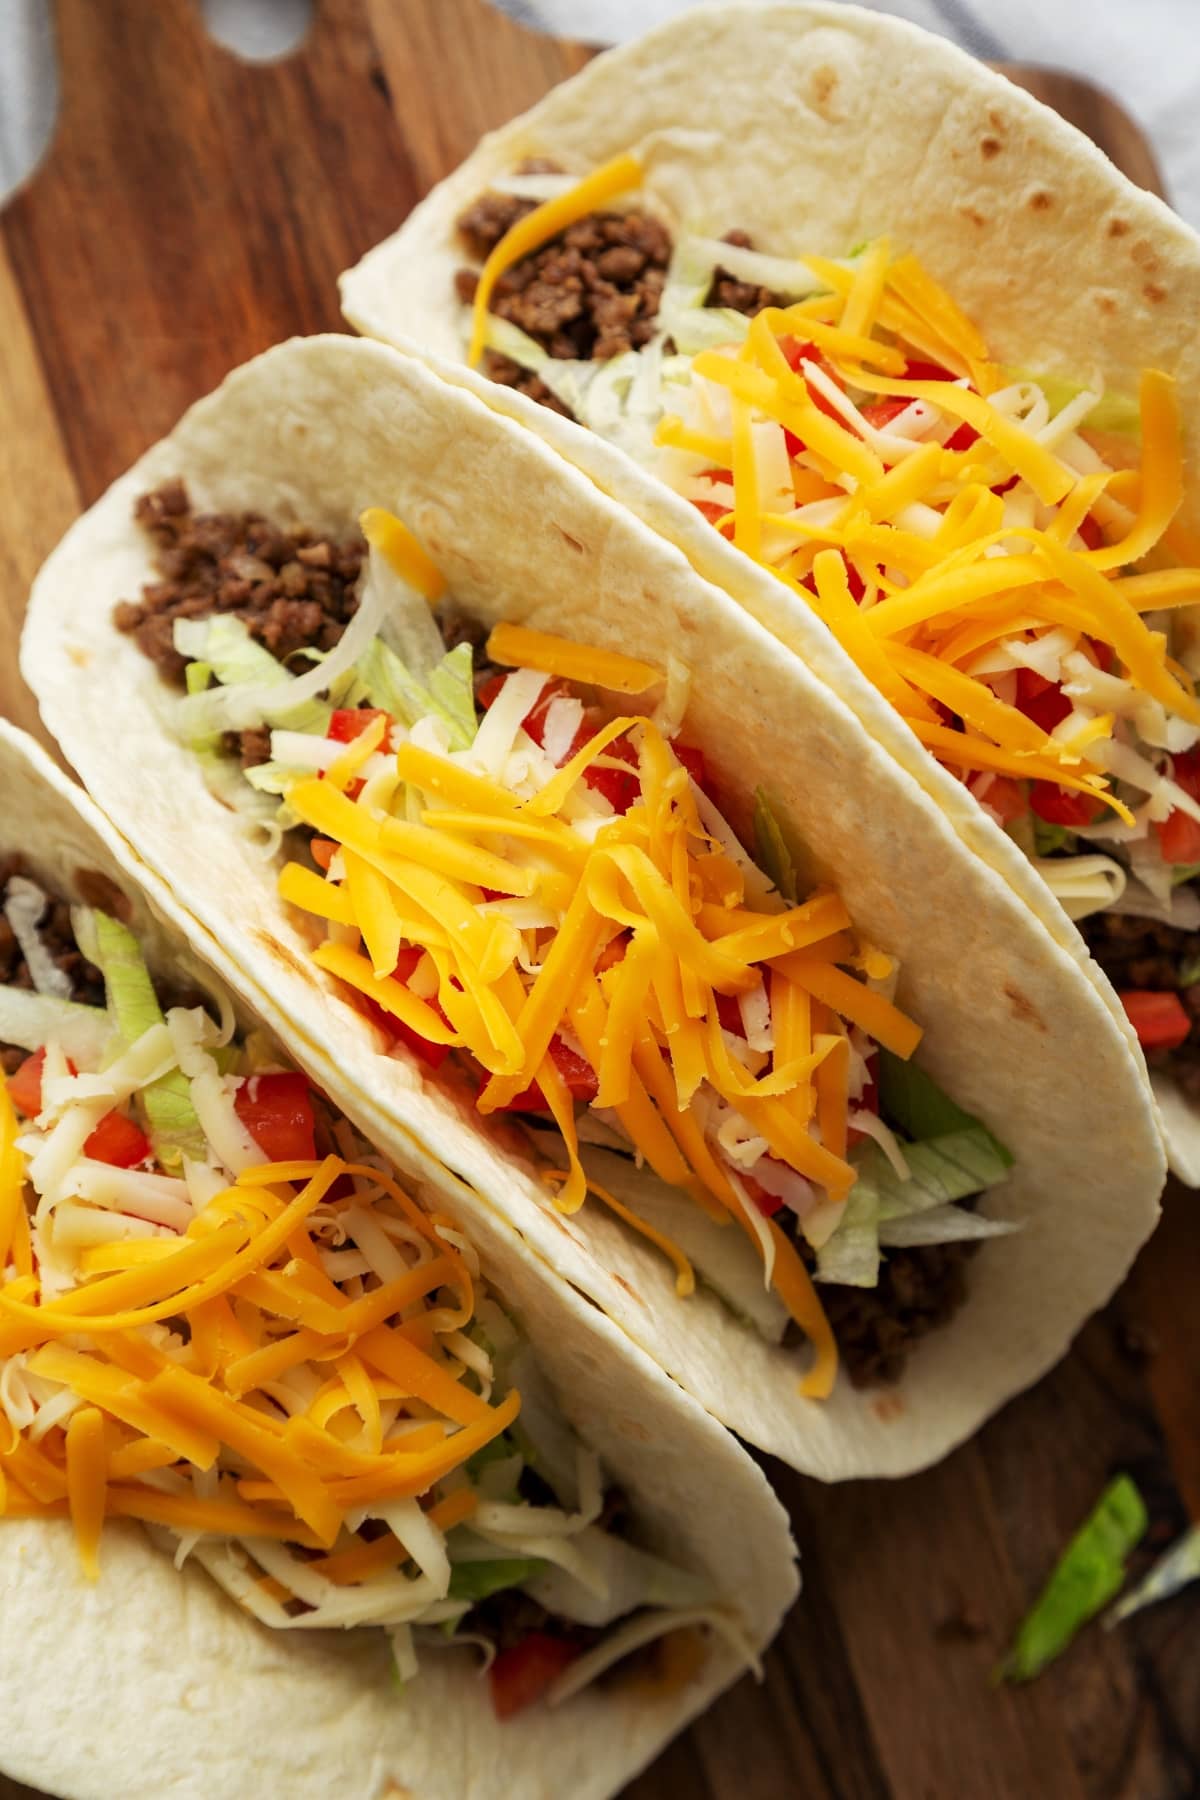 Homemade Tacos with Ground Beef, Vegetables and Cheese